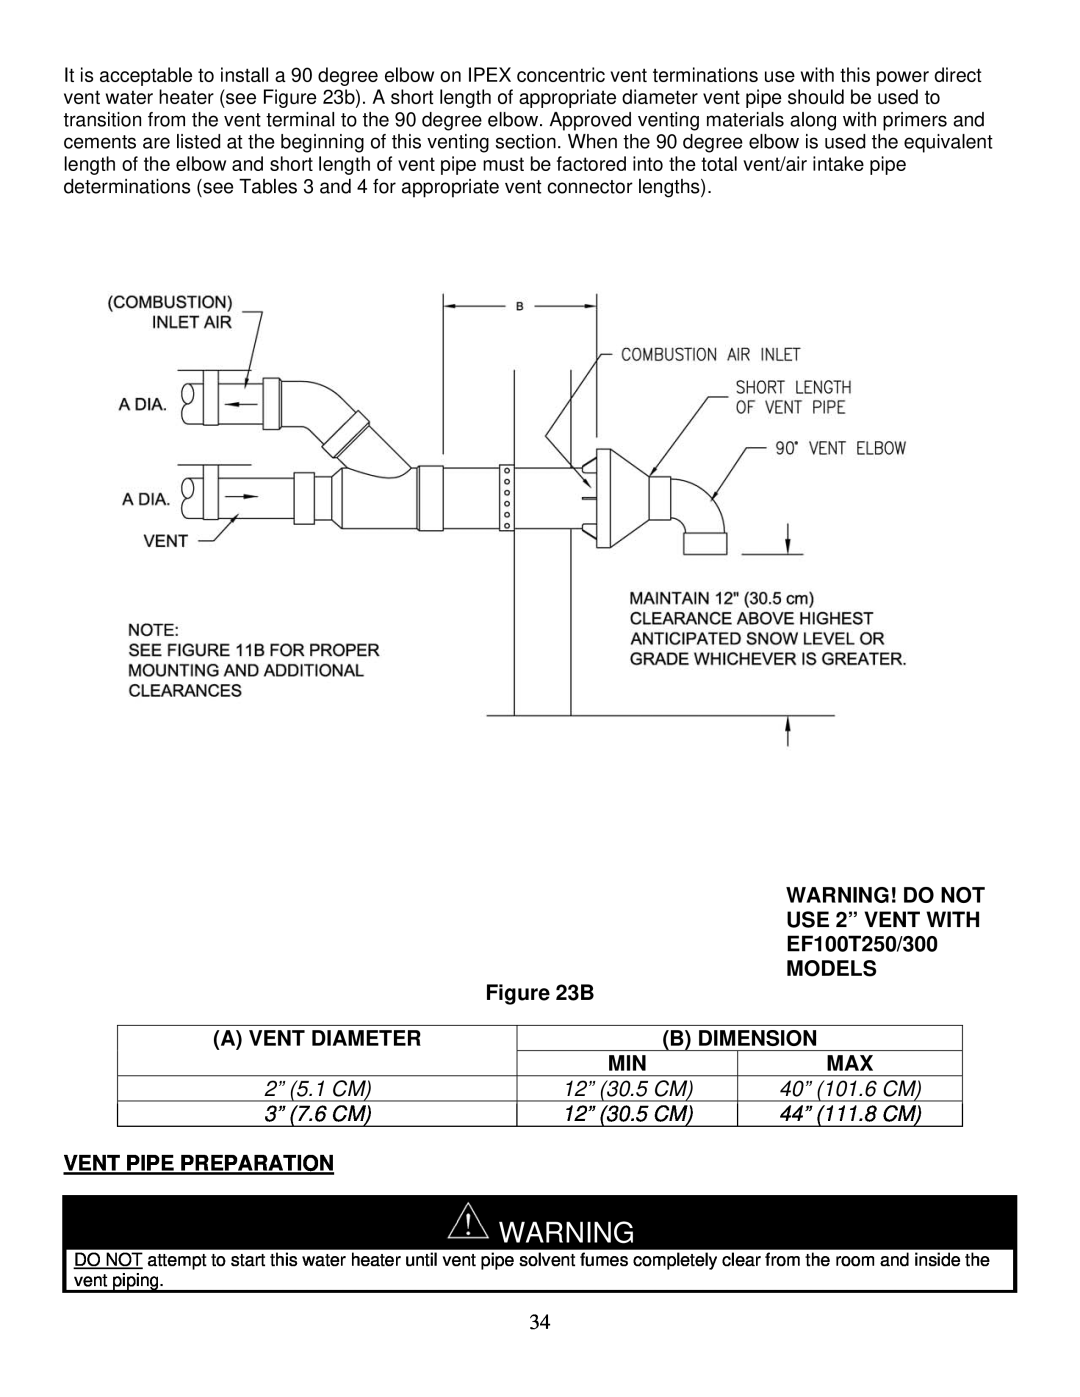 Bradford-White Corp 238-48384-00F Vent Pipe Preparation, Warning! Do Not, USE 2” VENT WITH, EF100T250/300, Models, B 